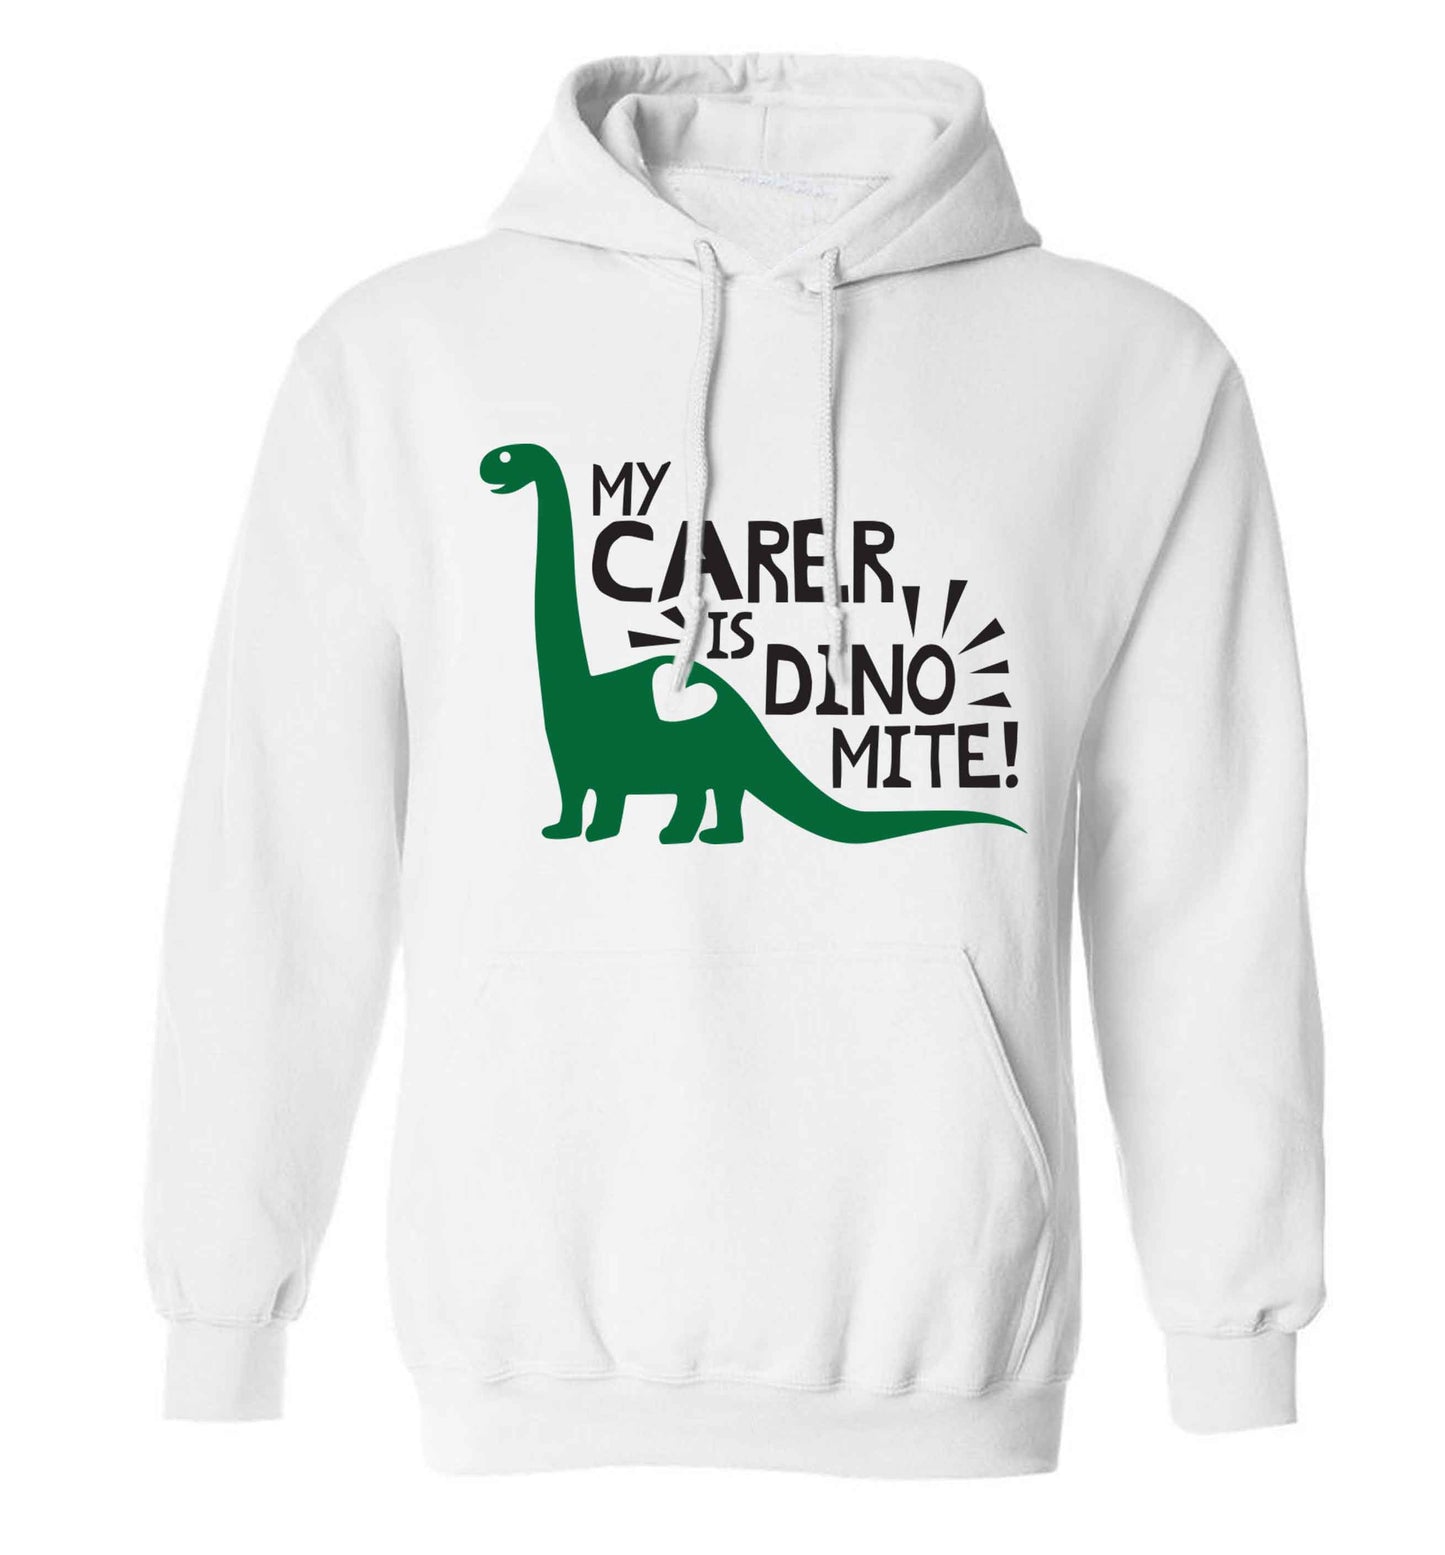 My carer is dinomite! adults unisex white hoodie 2XL